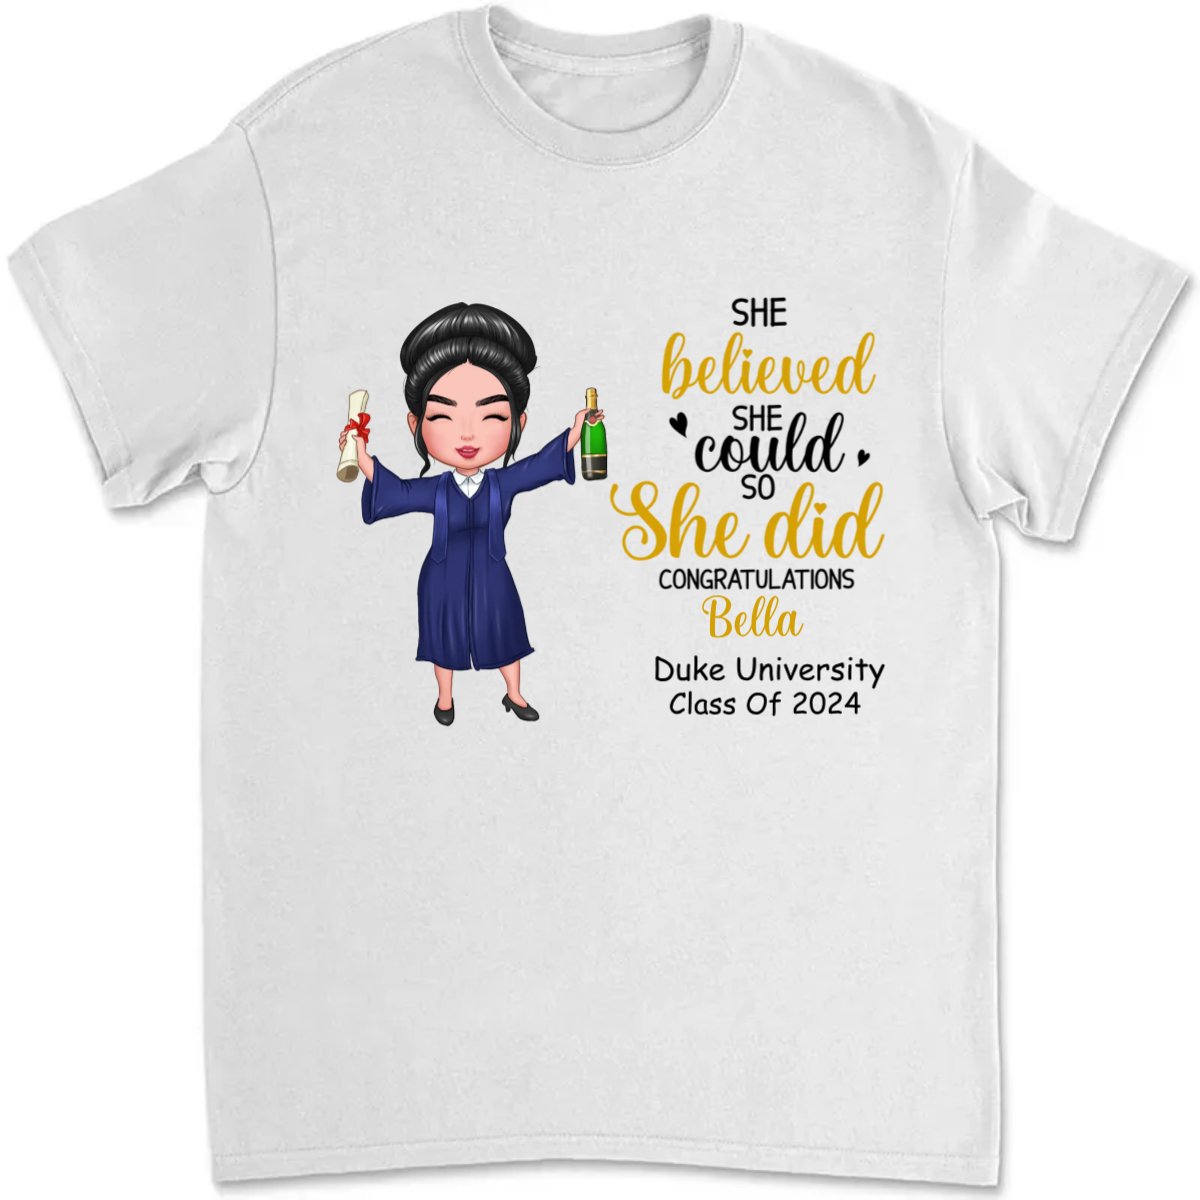 Graduation - She Believed She Could So She Did Congratulations - Personalized Tshirt - The Next Custom Gift